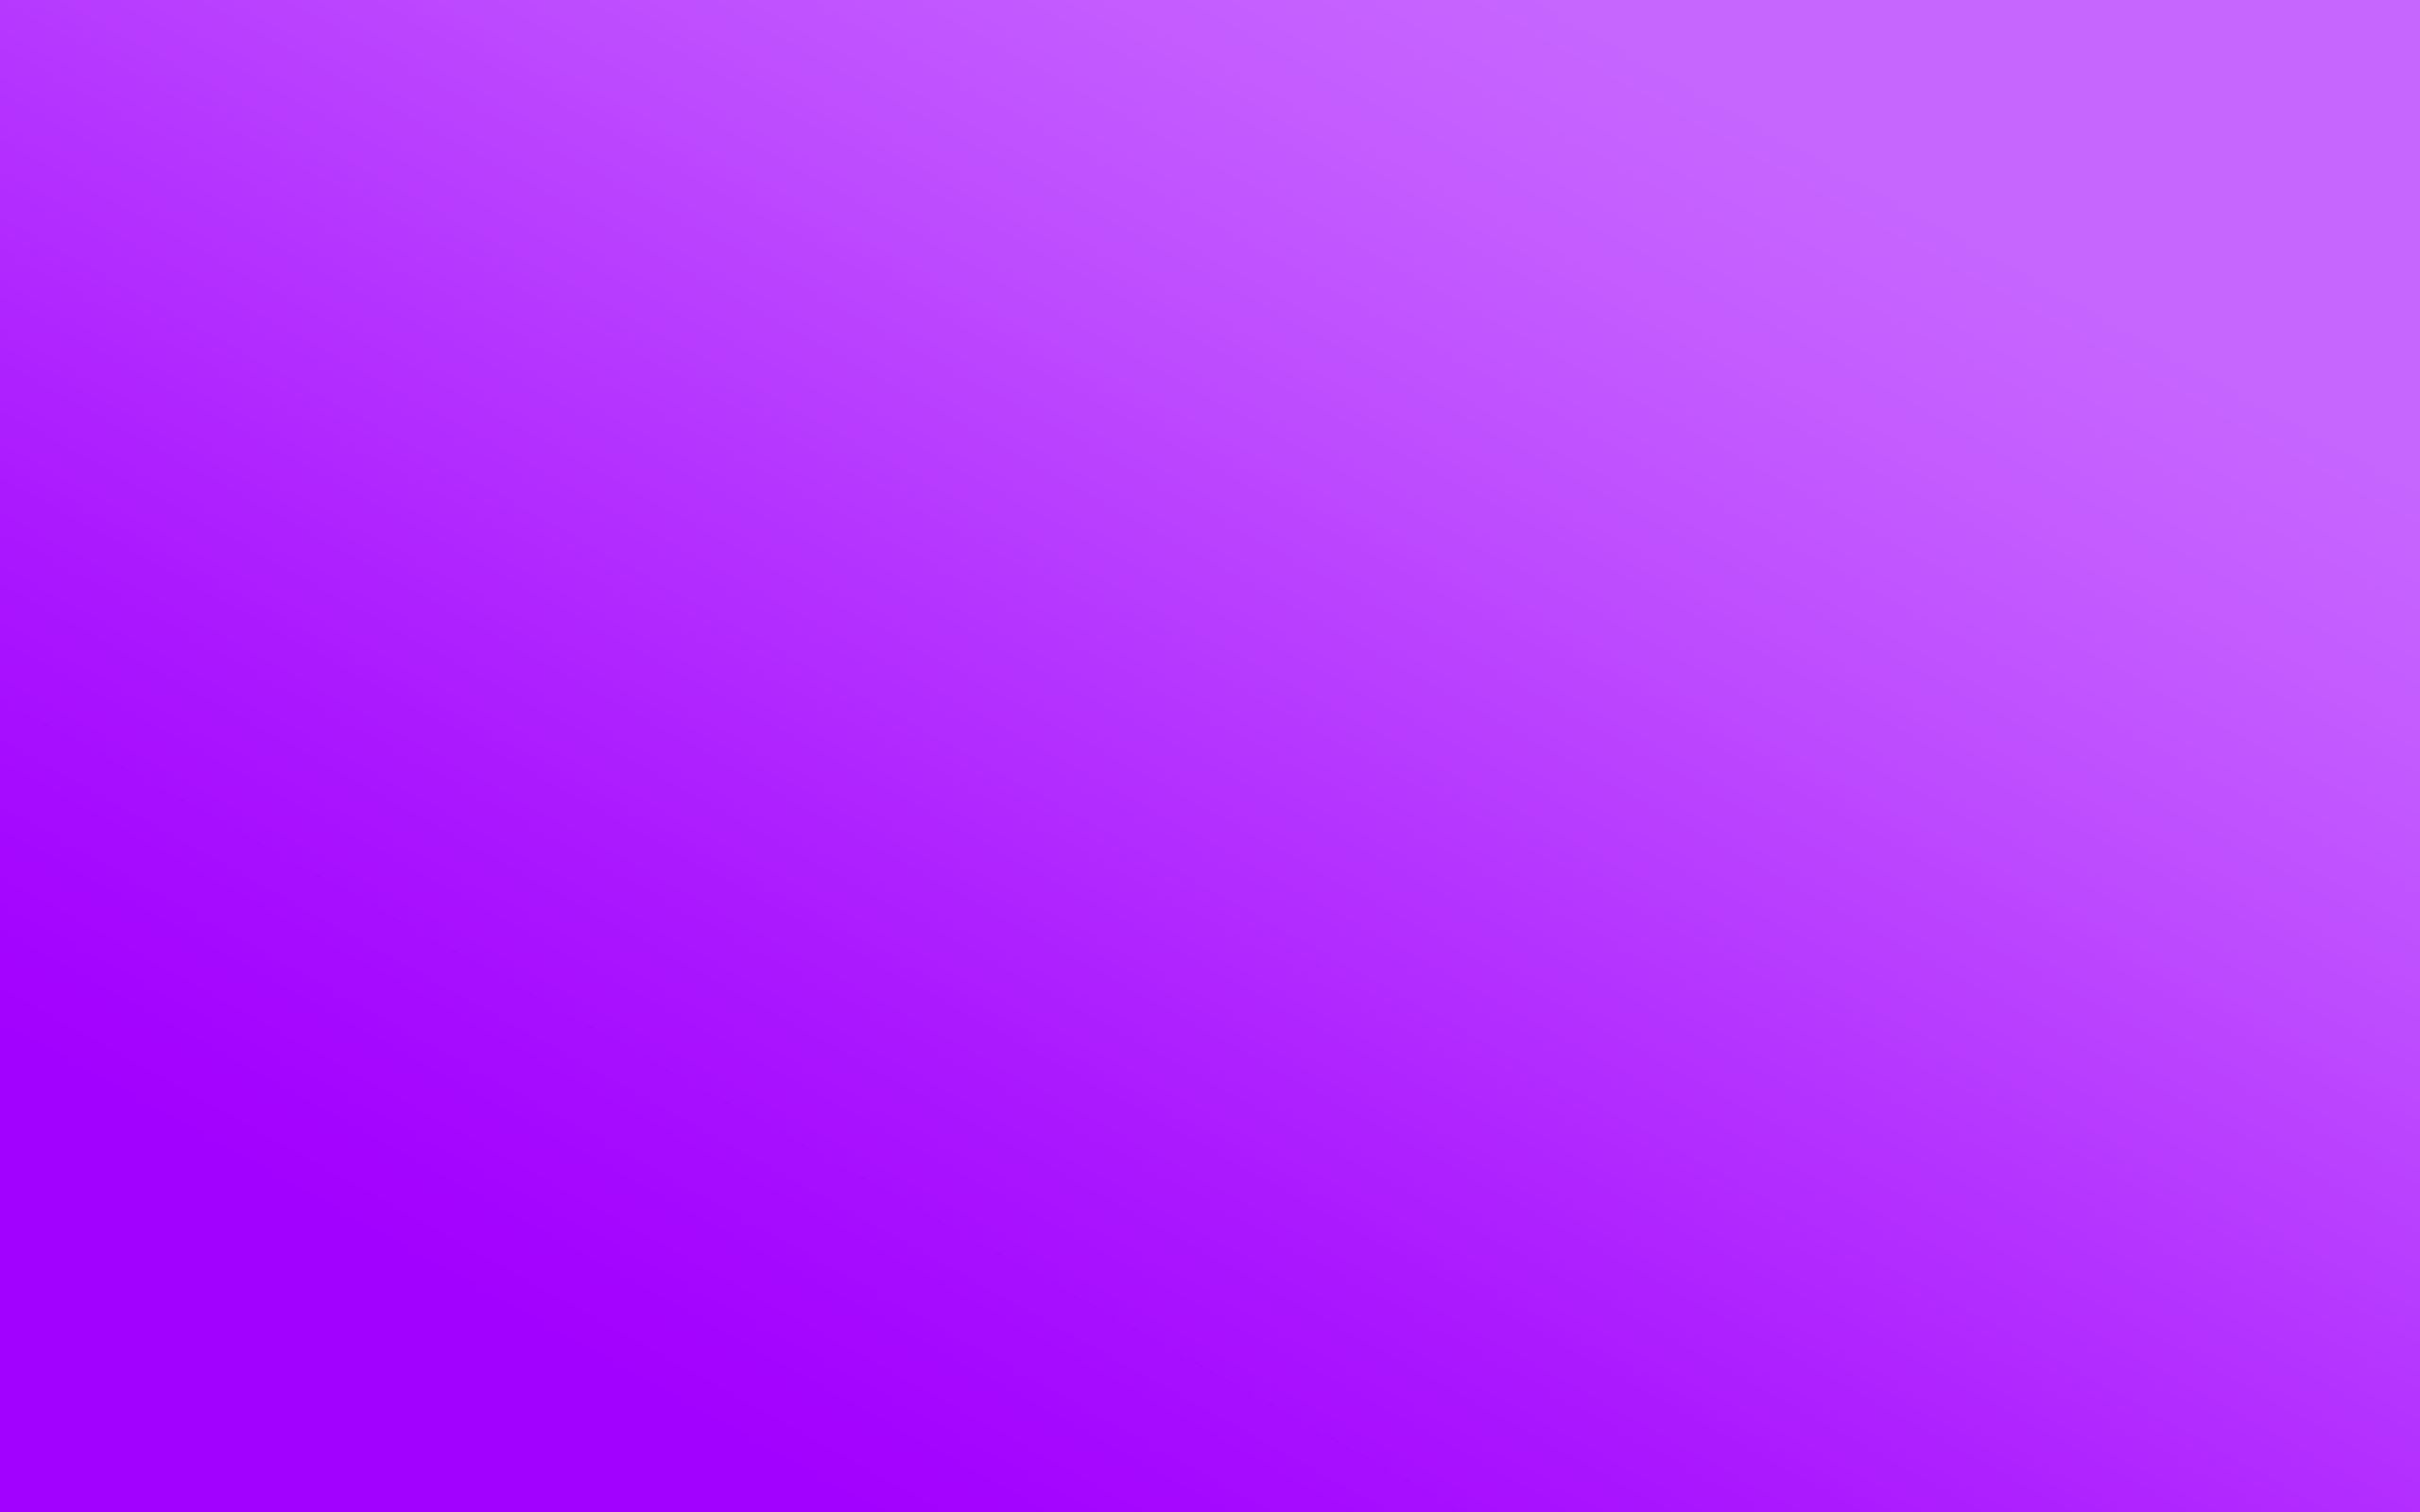 bright, light coloured, abstract, background, lilac, light, solid 4K